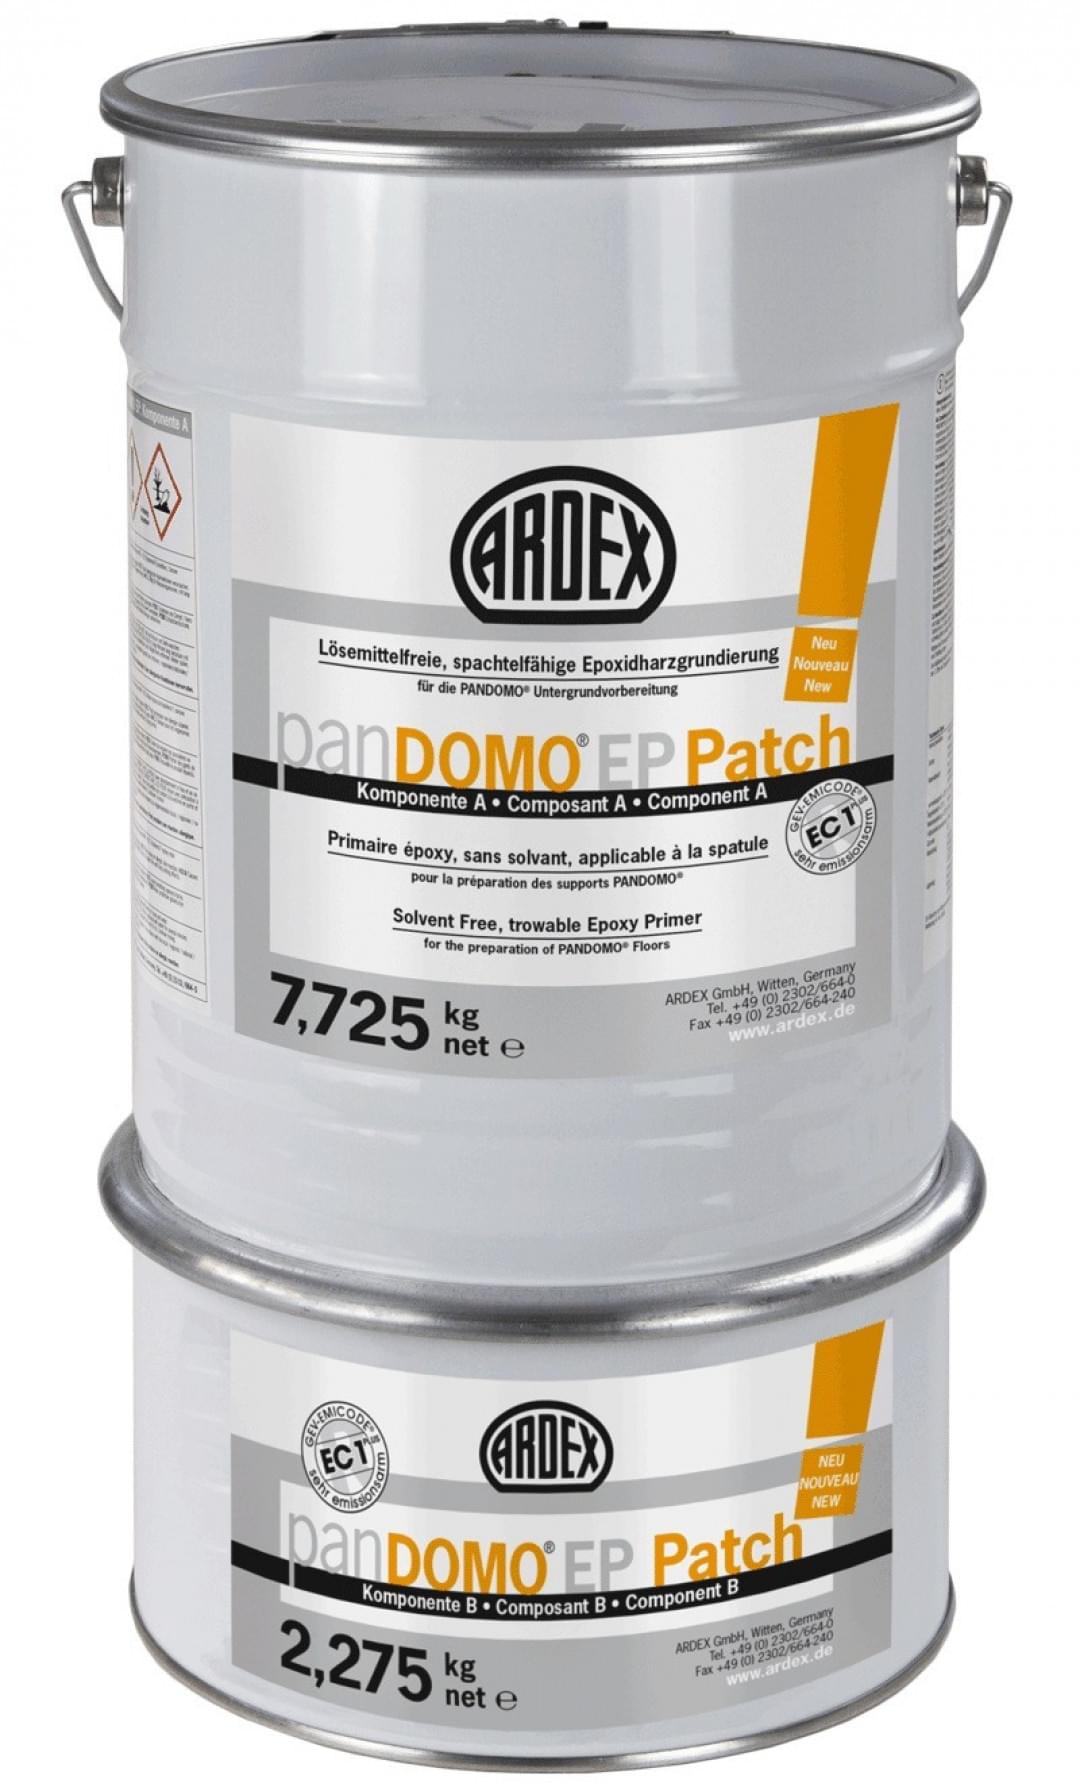 PANDOMO® EP Patch from ARDEX